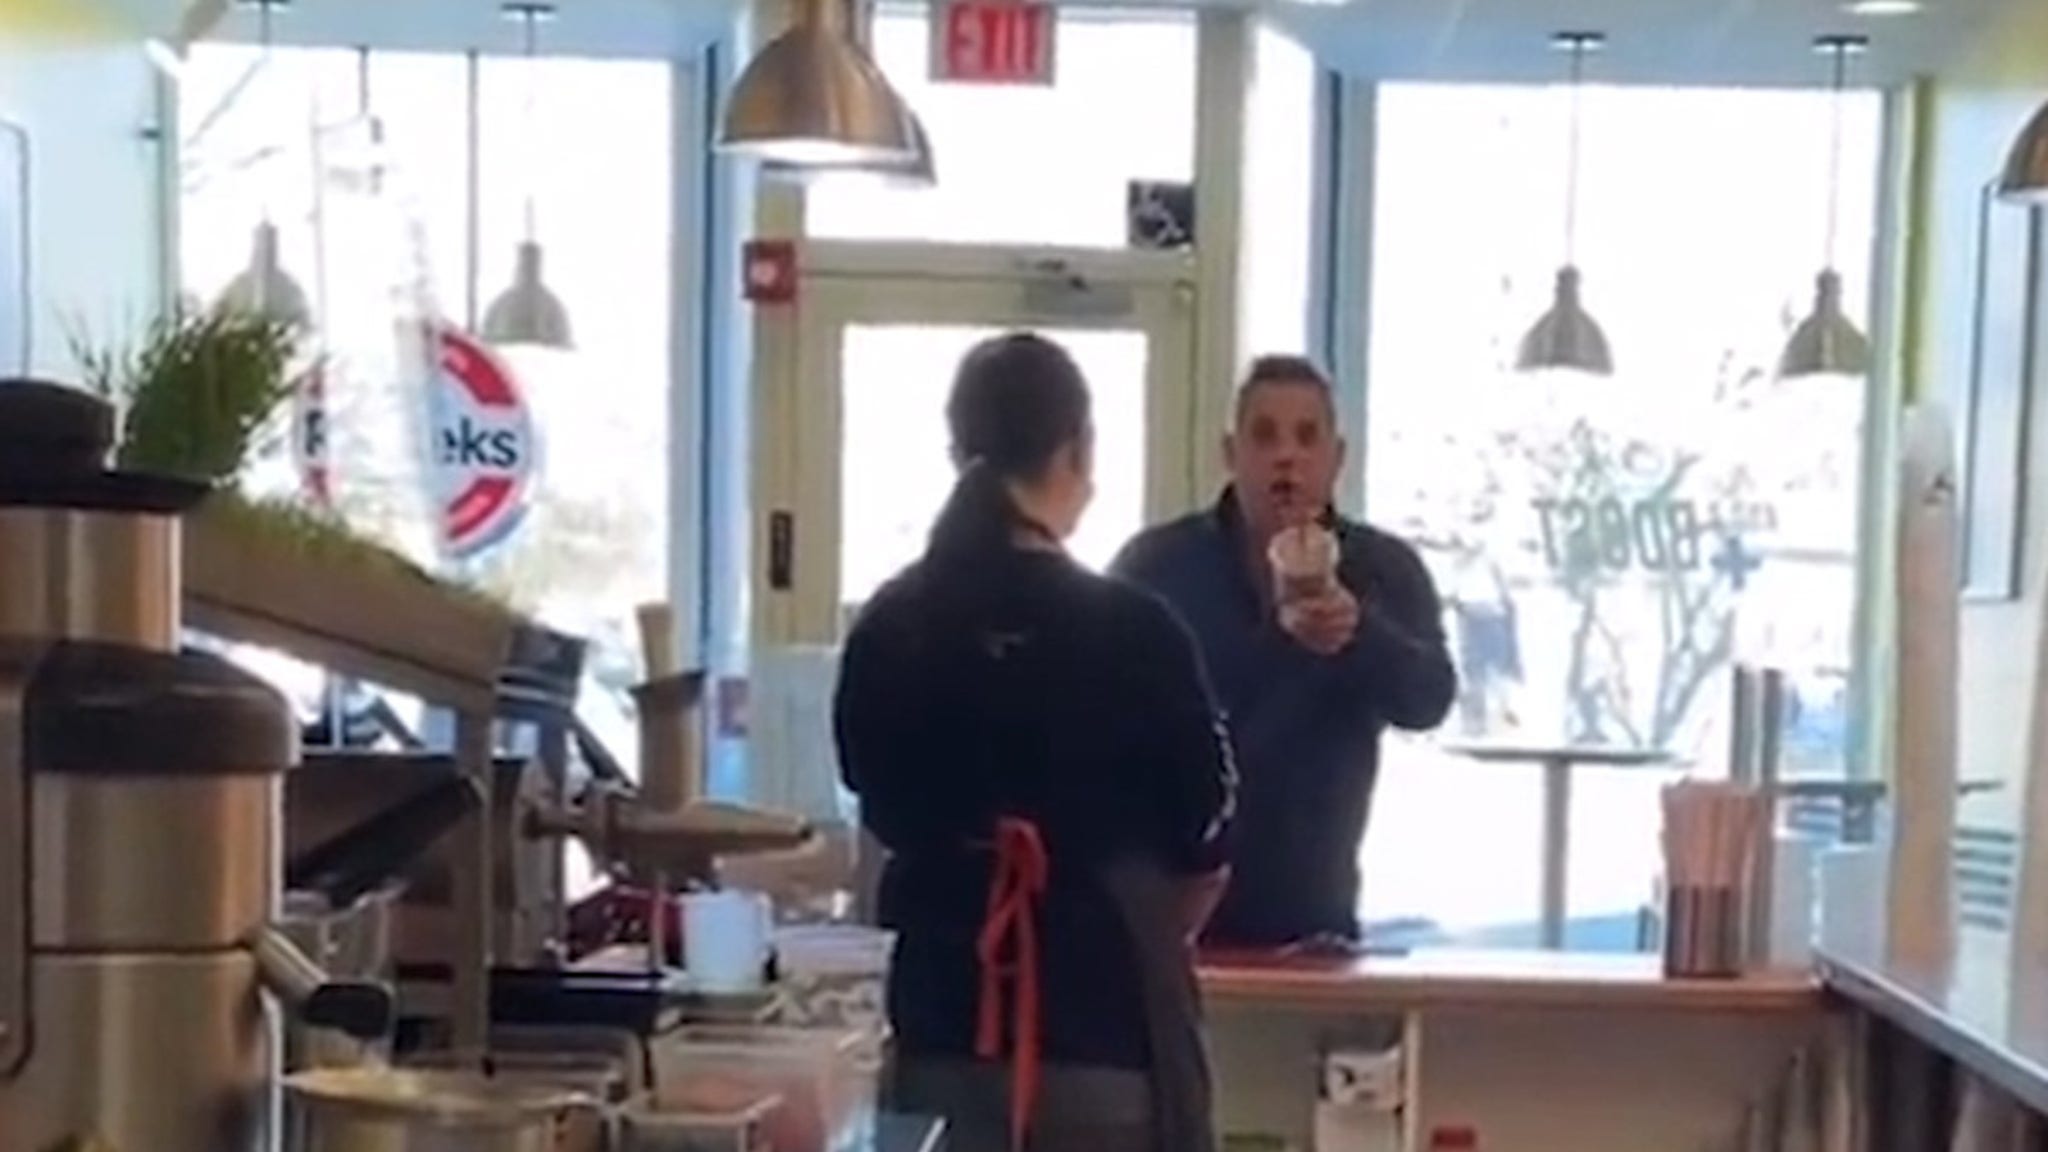 Man Arrested After Racist Tirade, Attack at Connecticut Smoothie Store